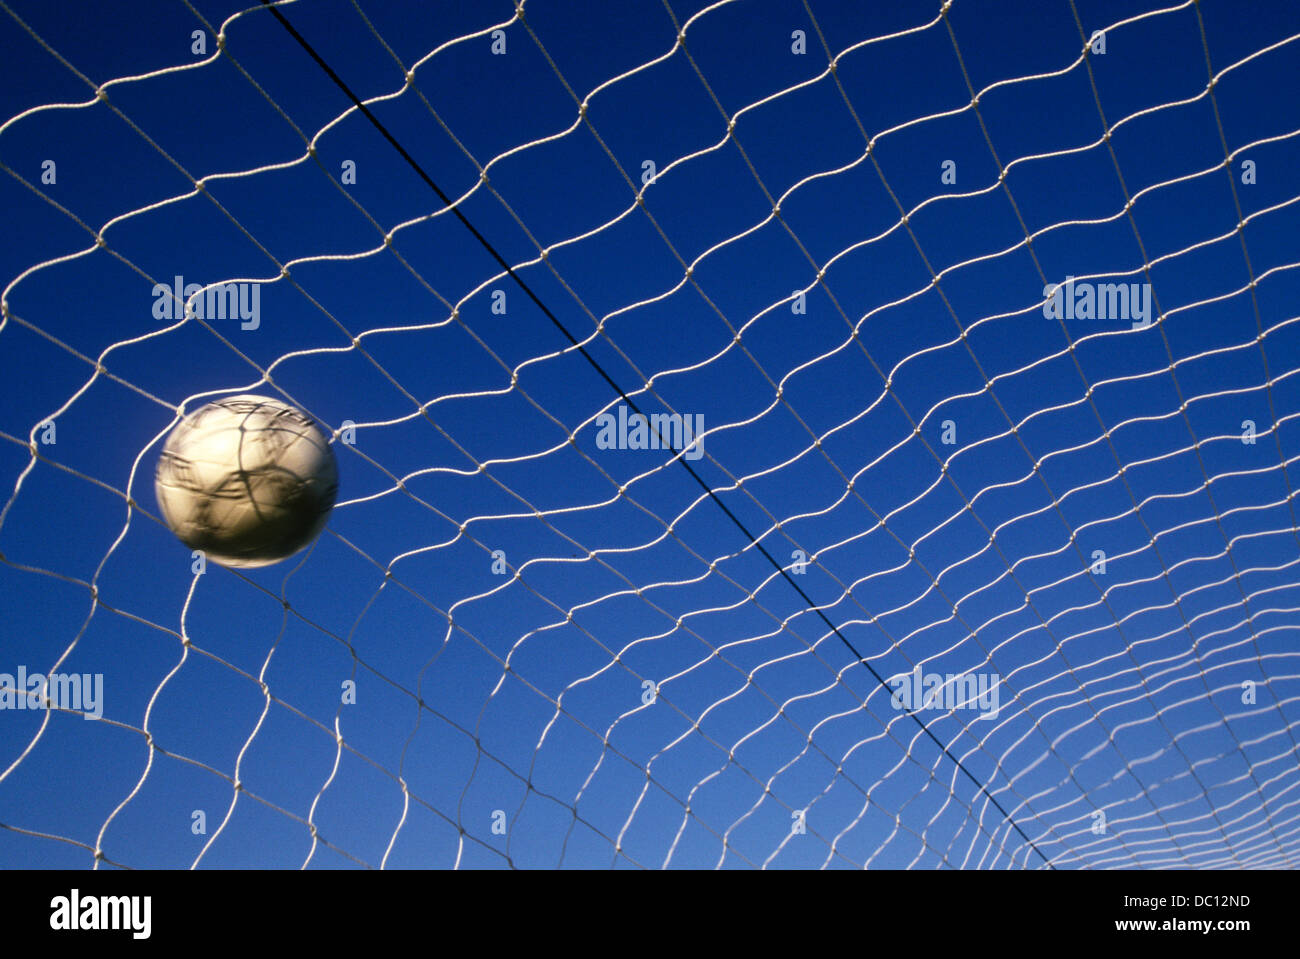 Soccer ball in net indicating a goal. Stock Photo